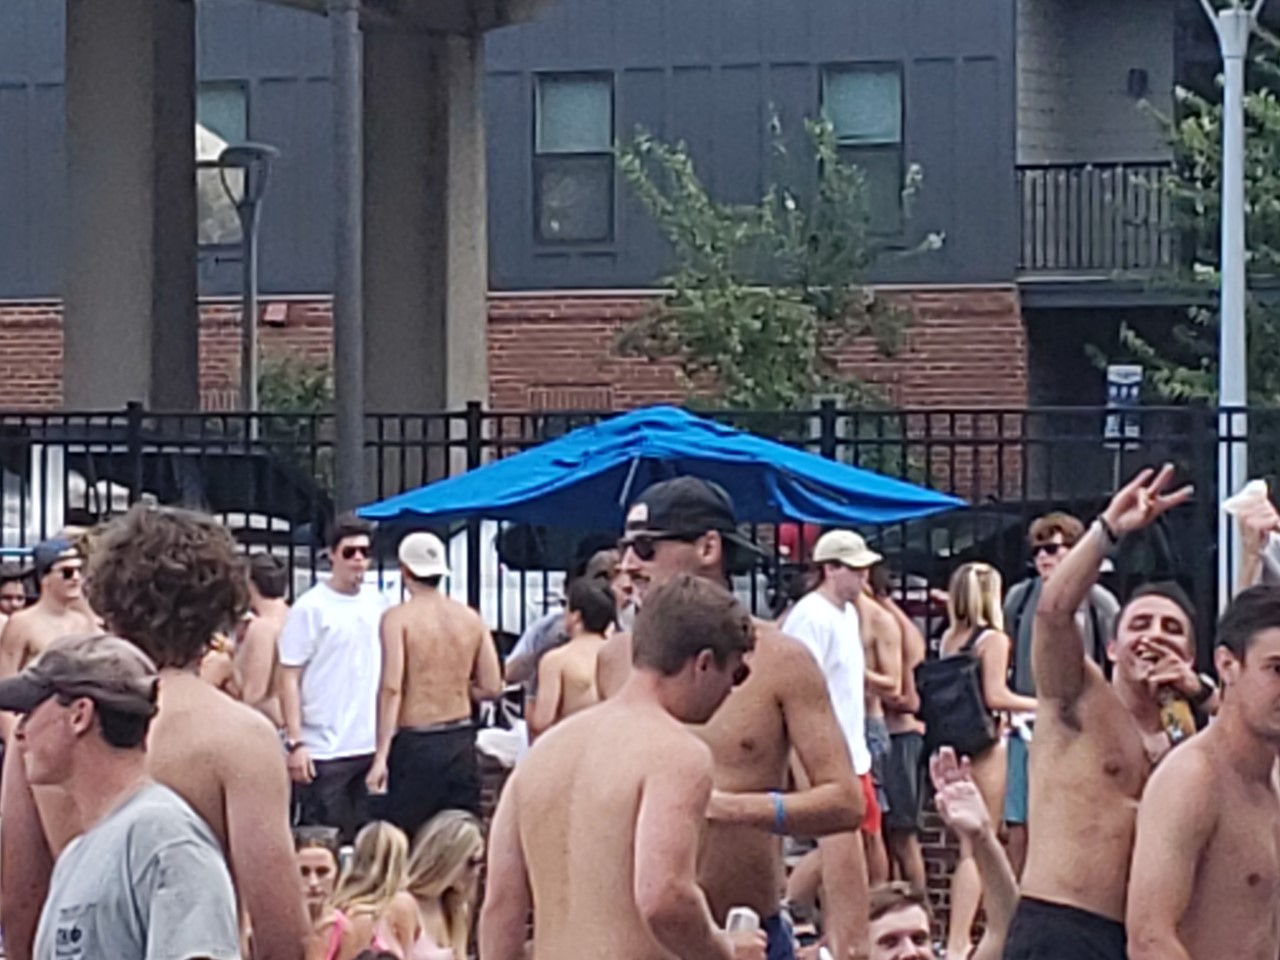 Pool party disbanded in Columbia, South Carolina Provided/City of Columbia